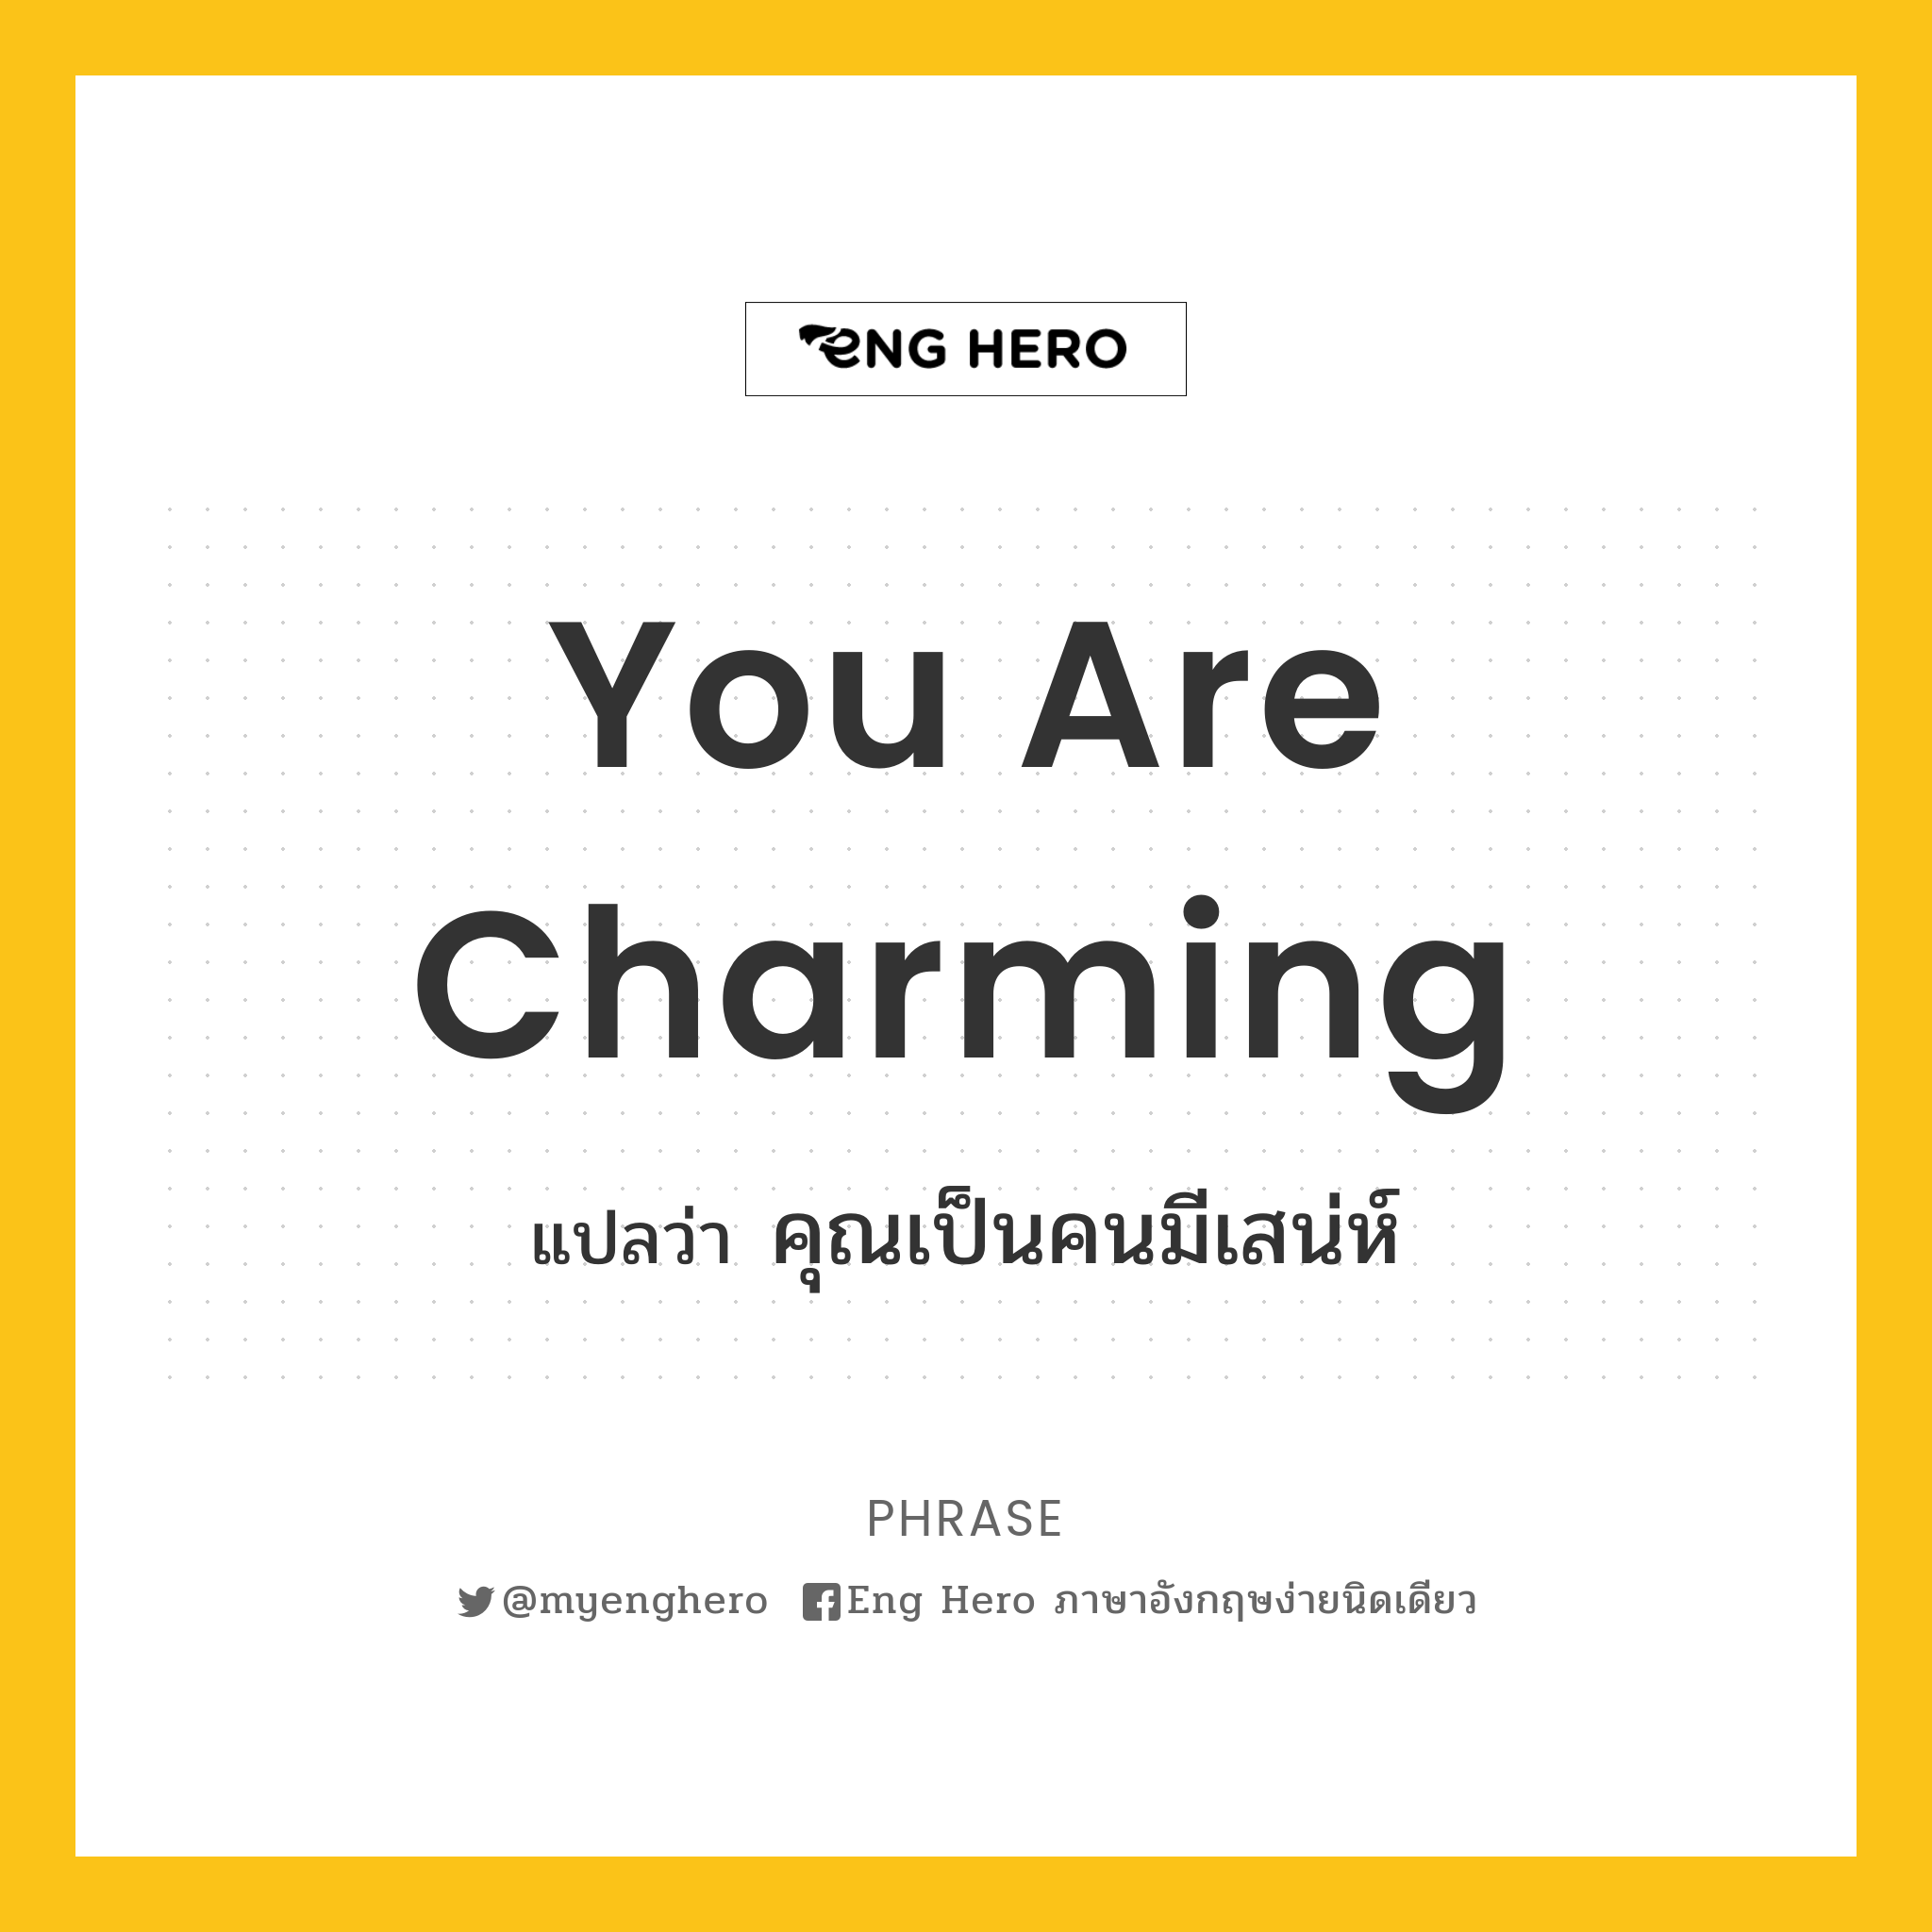 You are charming